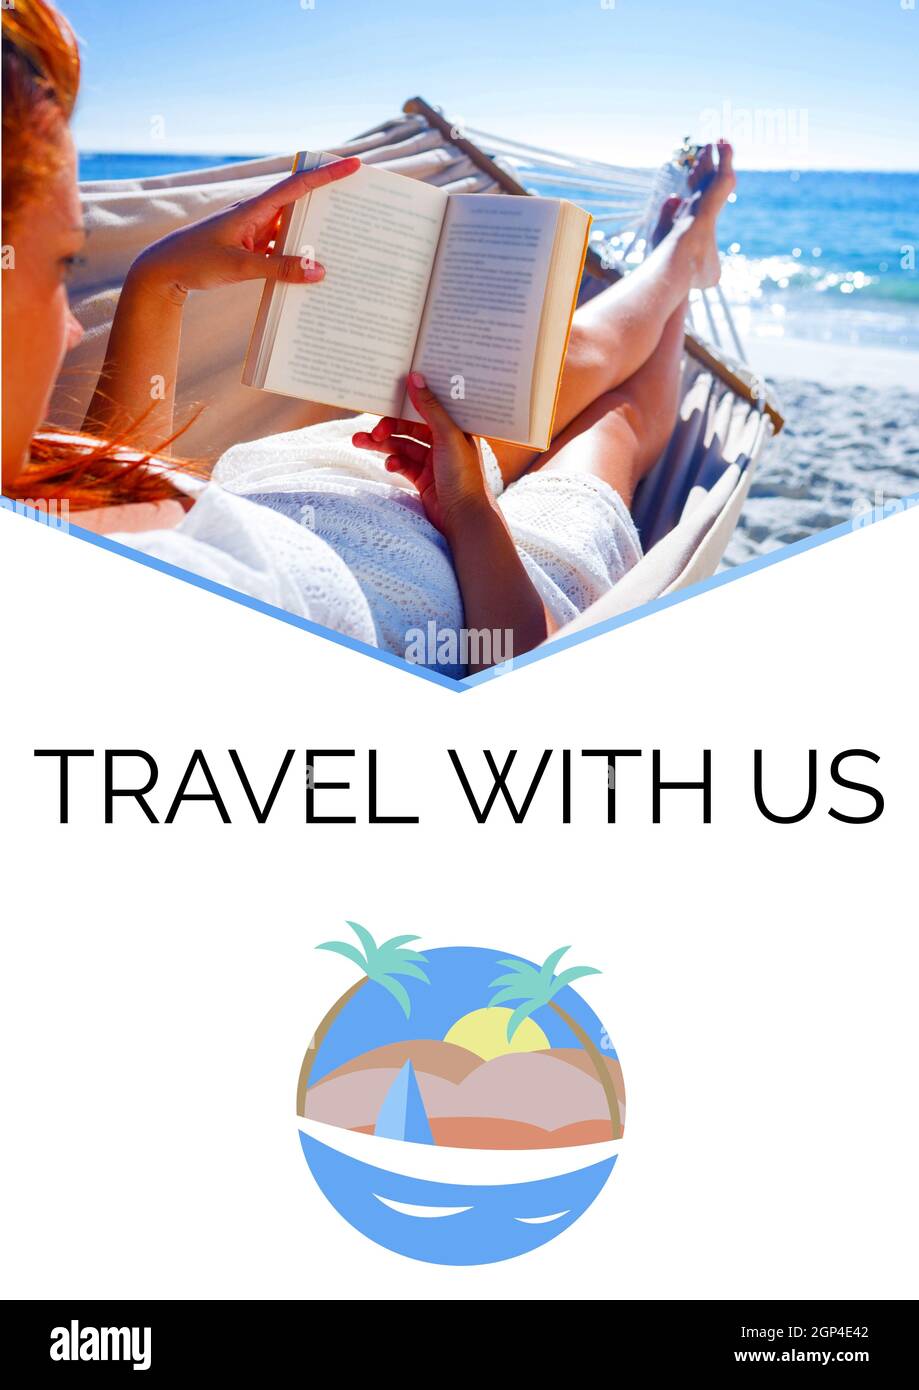 Composition of travel with us text over caucasian woman reading book on beach Stock Photo